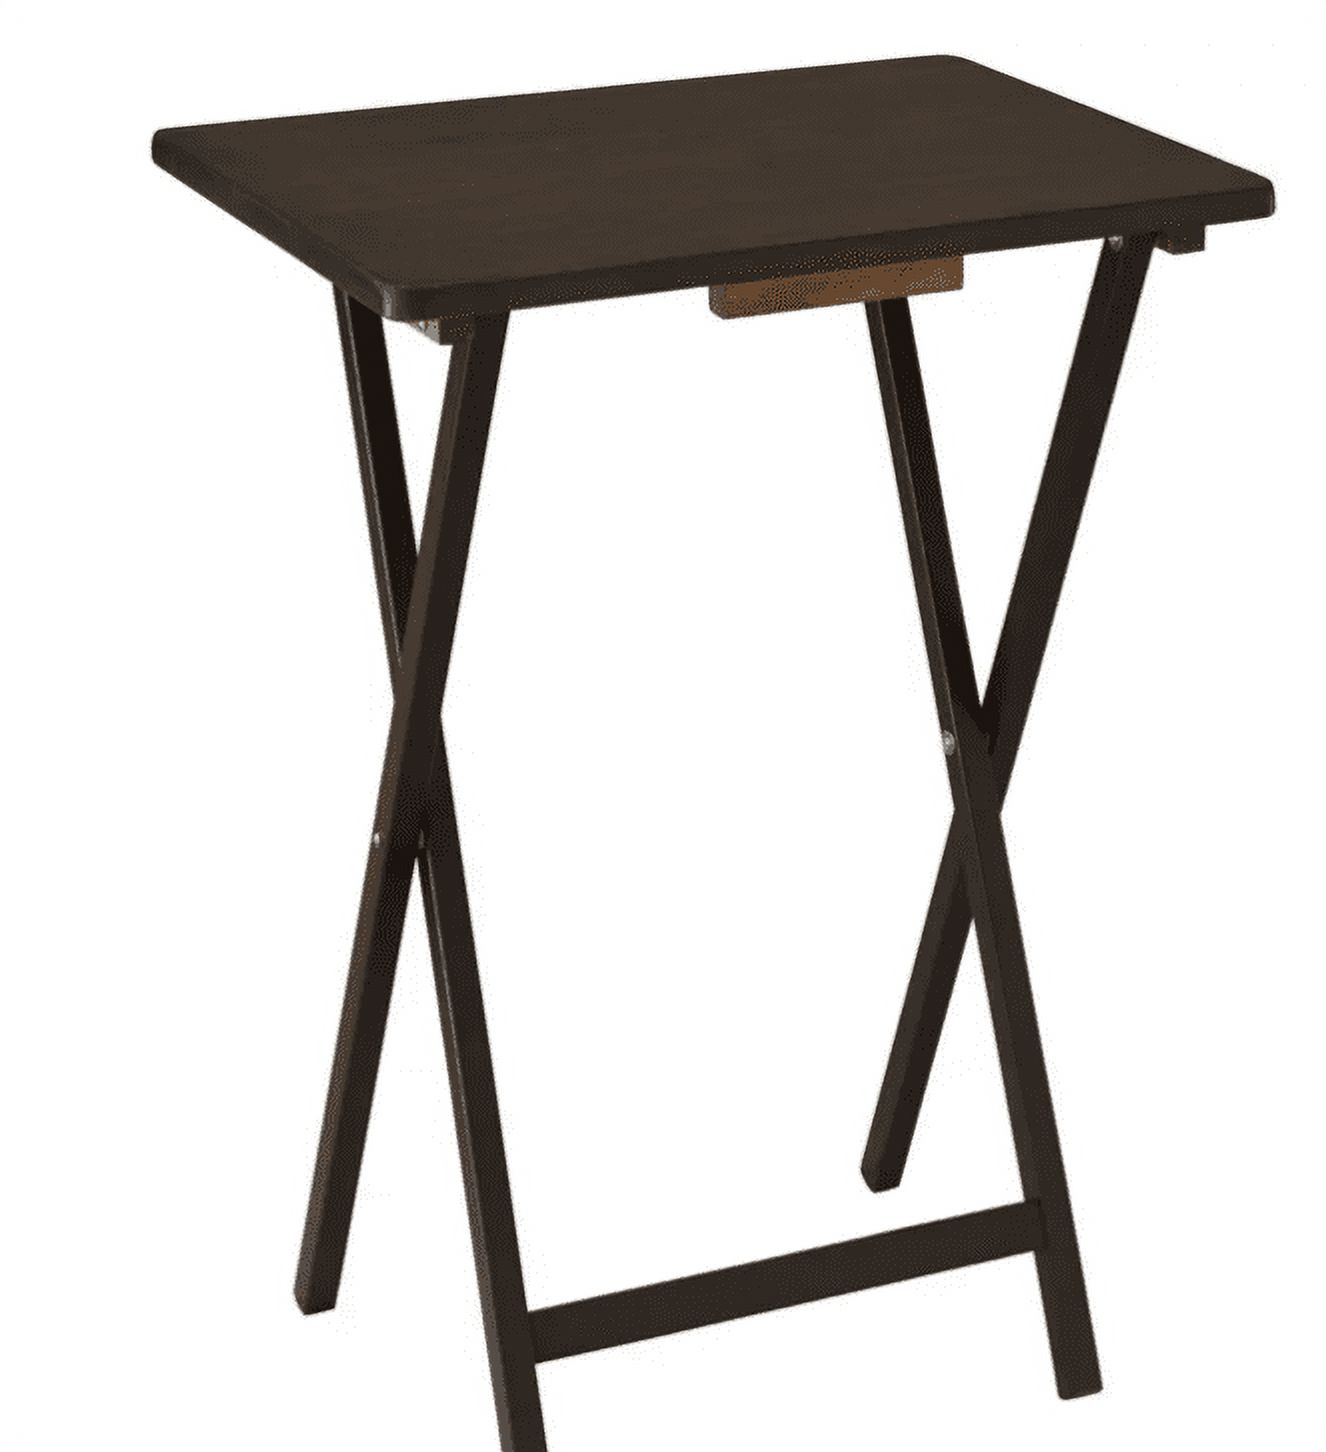 Mainstays Indoor Folding Table Set of 4 in Walnut L19 x W15 x H26 inches. 4 Tables+1 Rack Stand. - image 5 of 5